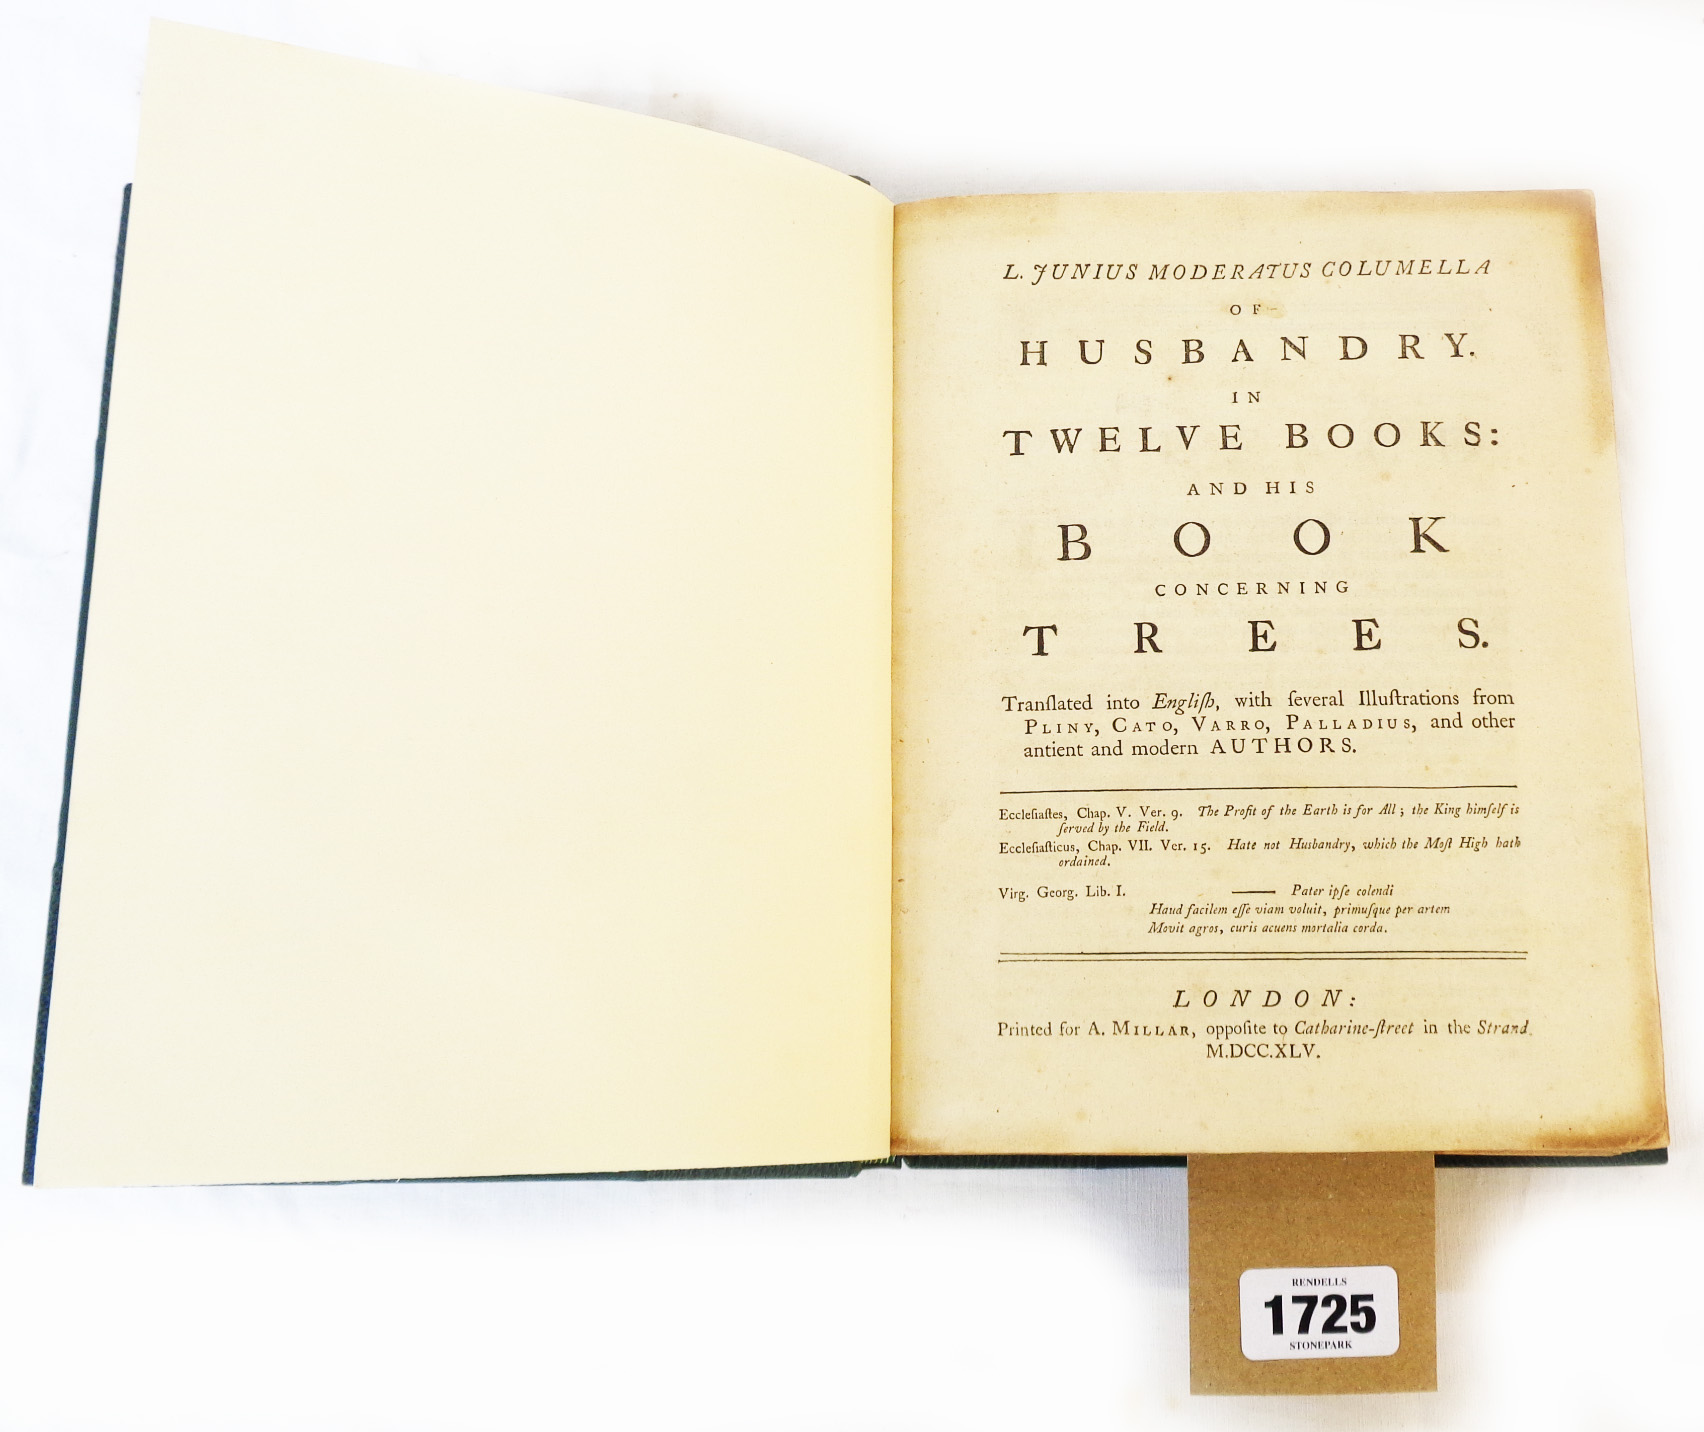 Husbandry in 12 books and His Book Concerning Trees: by J.M. Columella, 4to., rebound, Pub. London